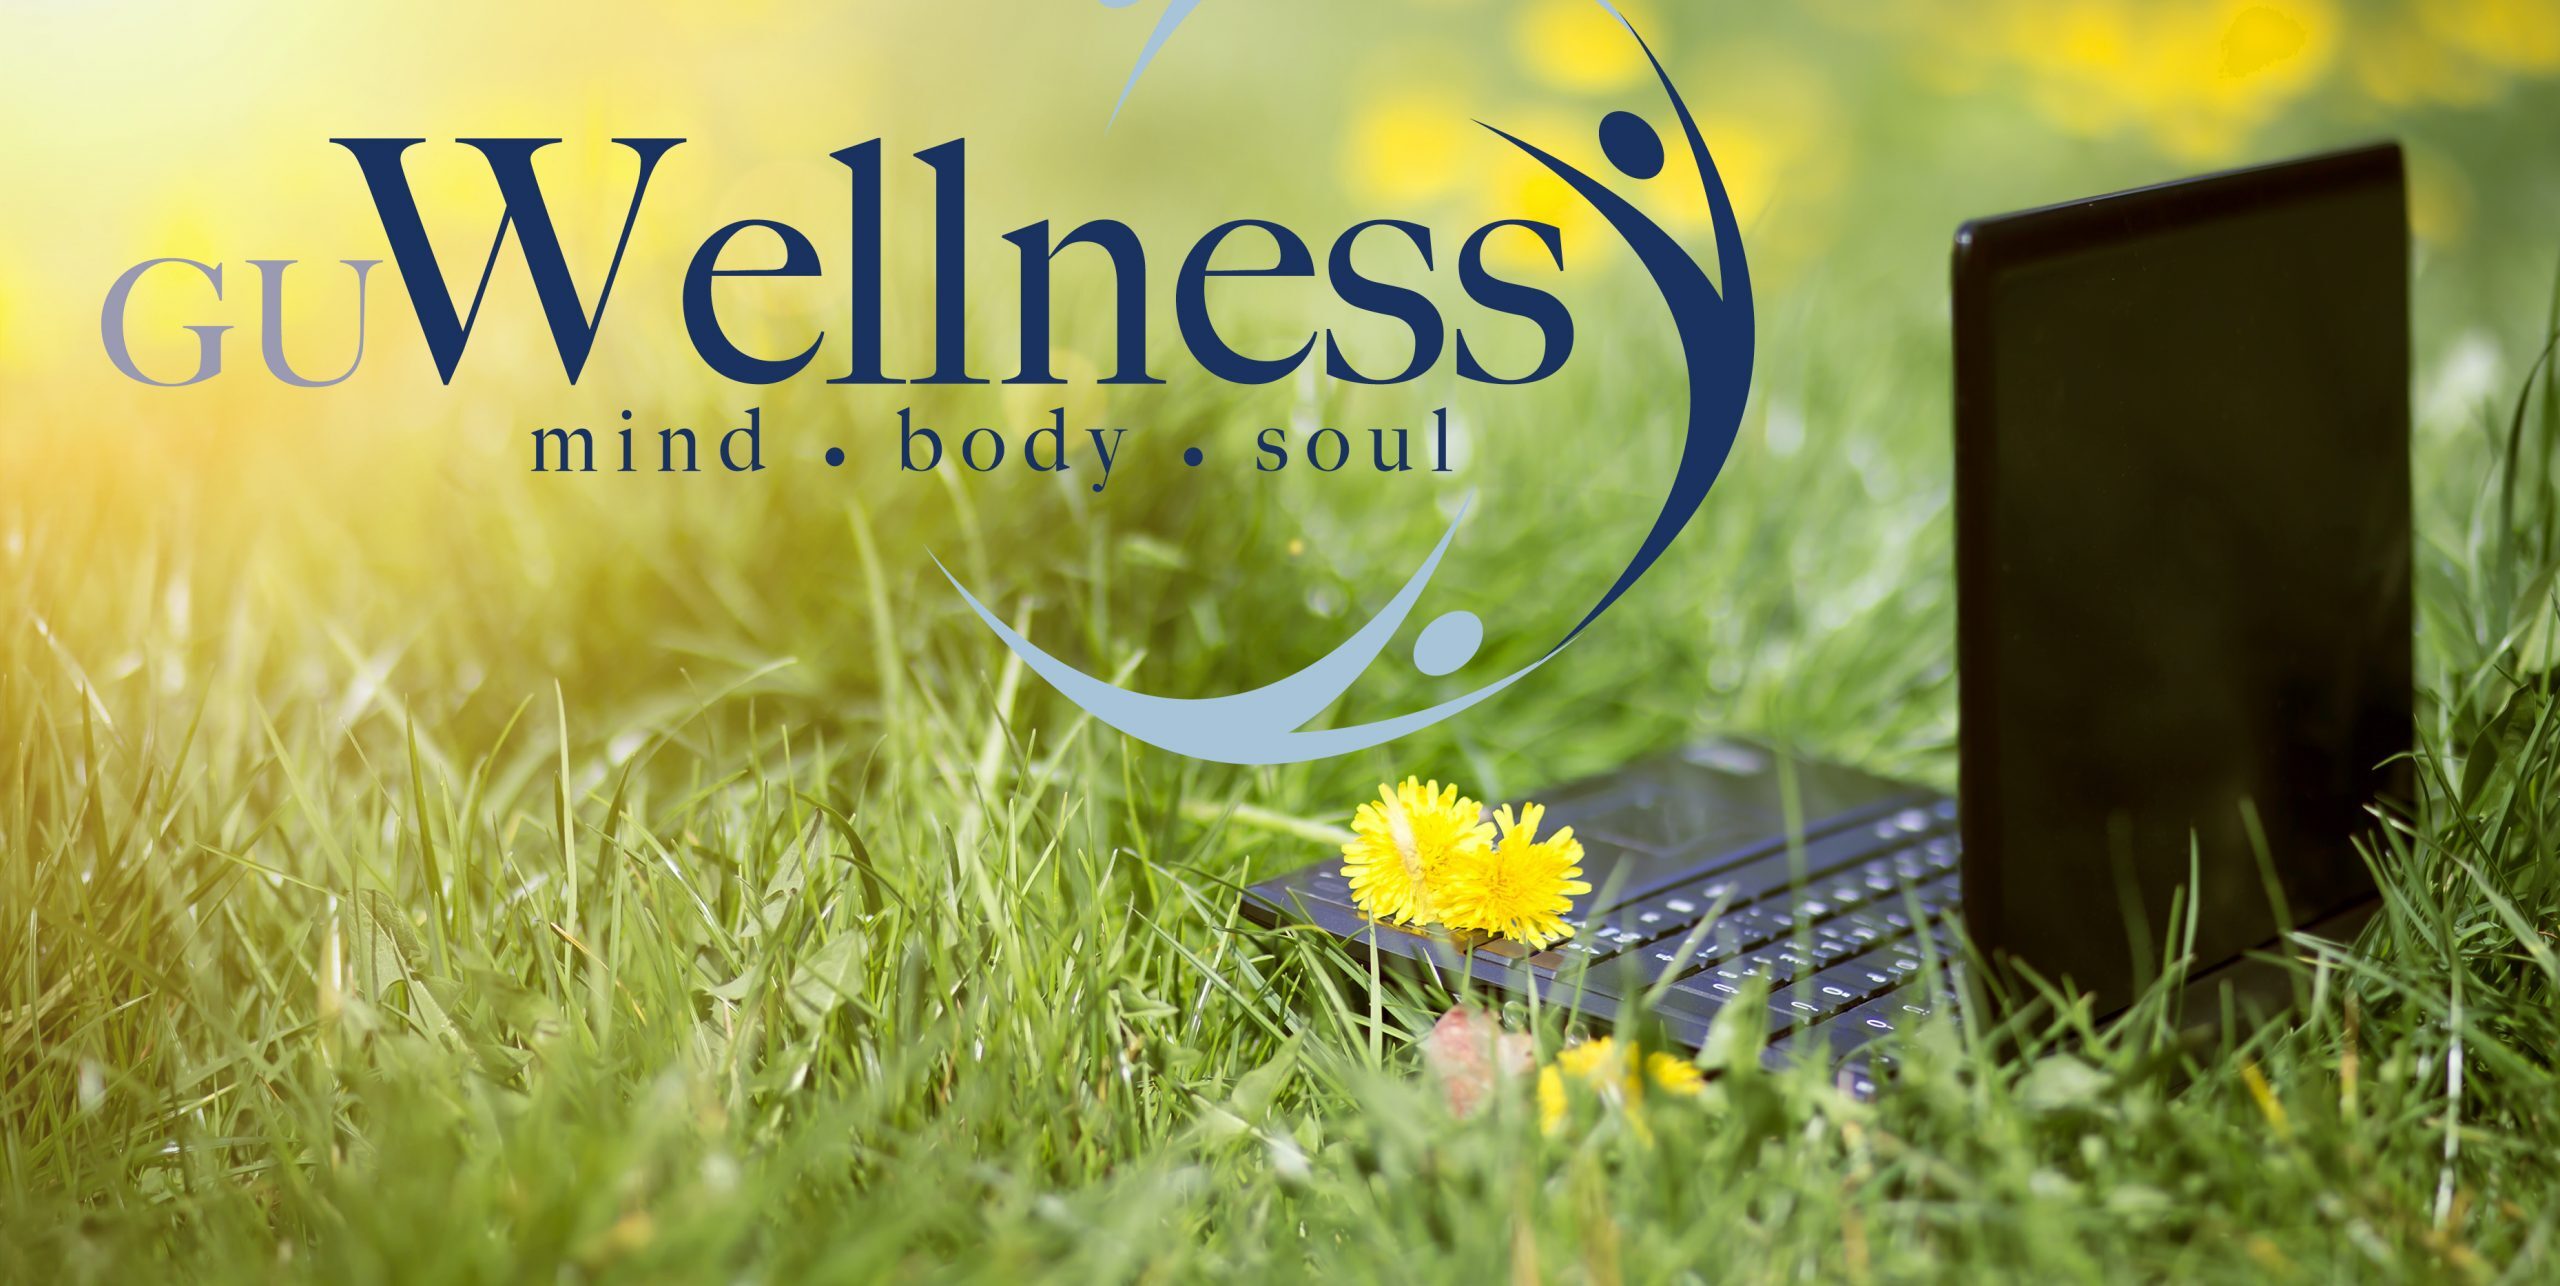 Relaxation Therapy - Global Wellness Institute